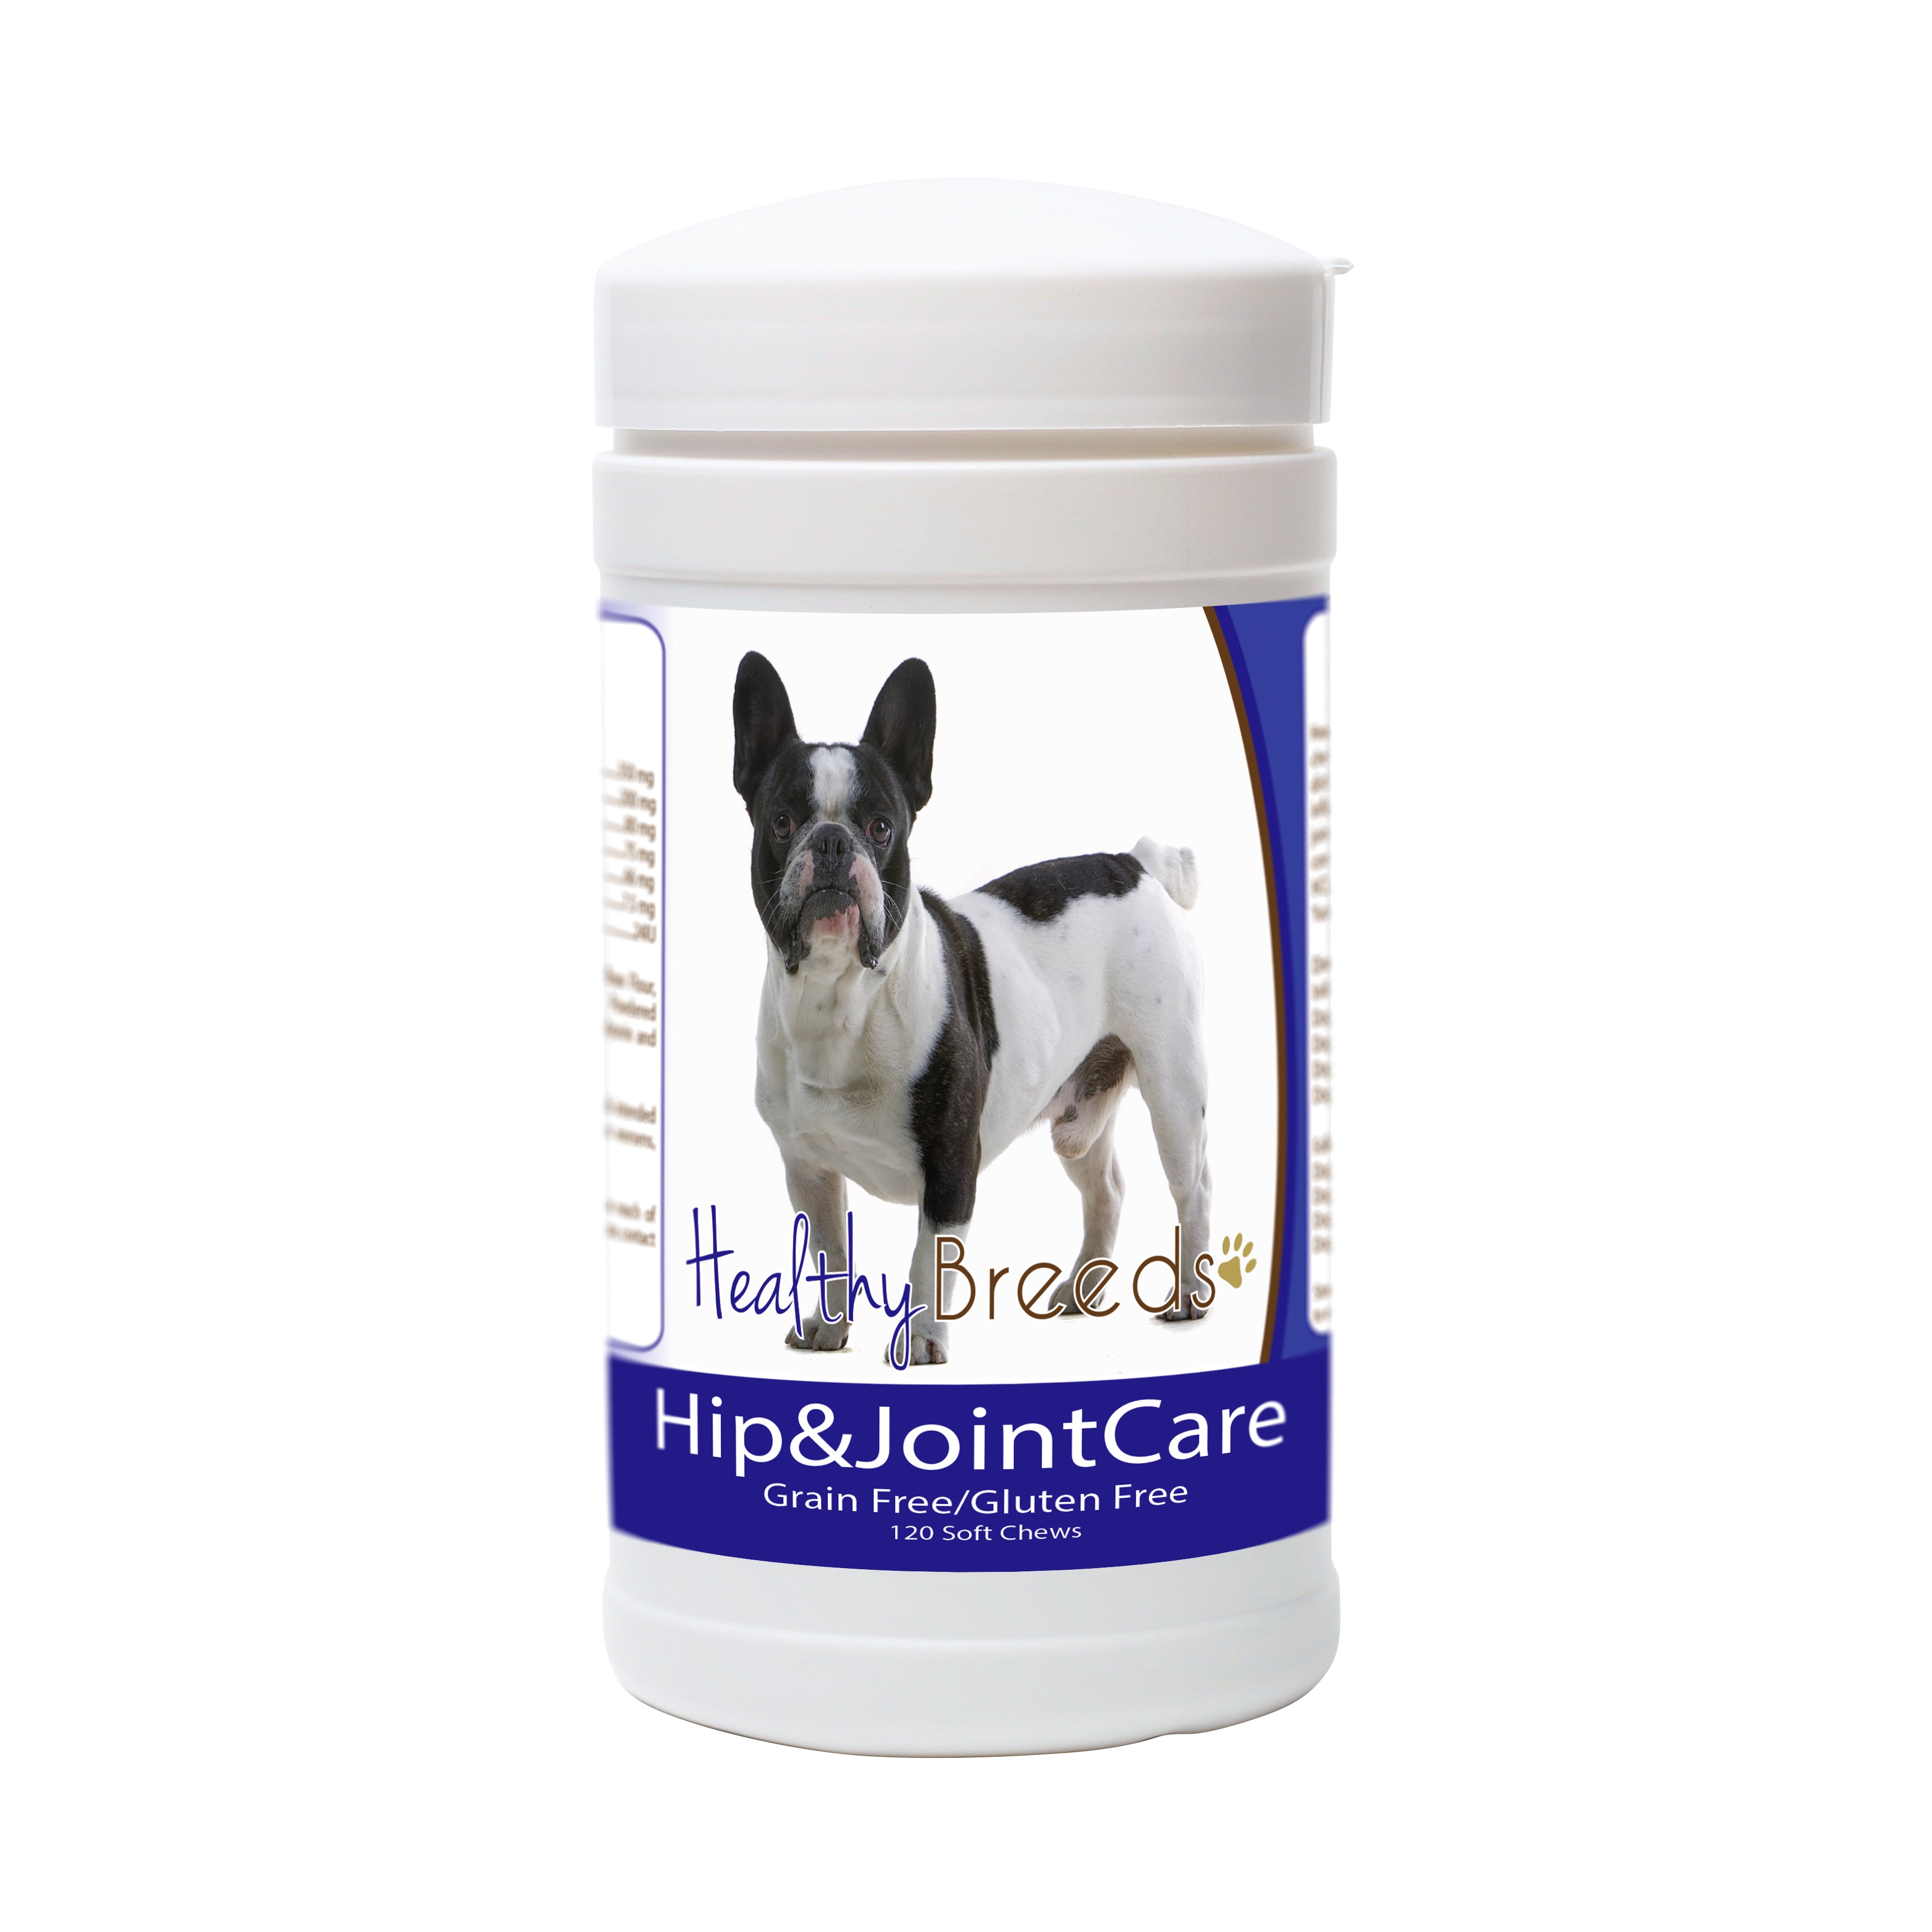 Healthy Breeds Hip & Joint Care Soft Chews - French Bulldog